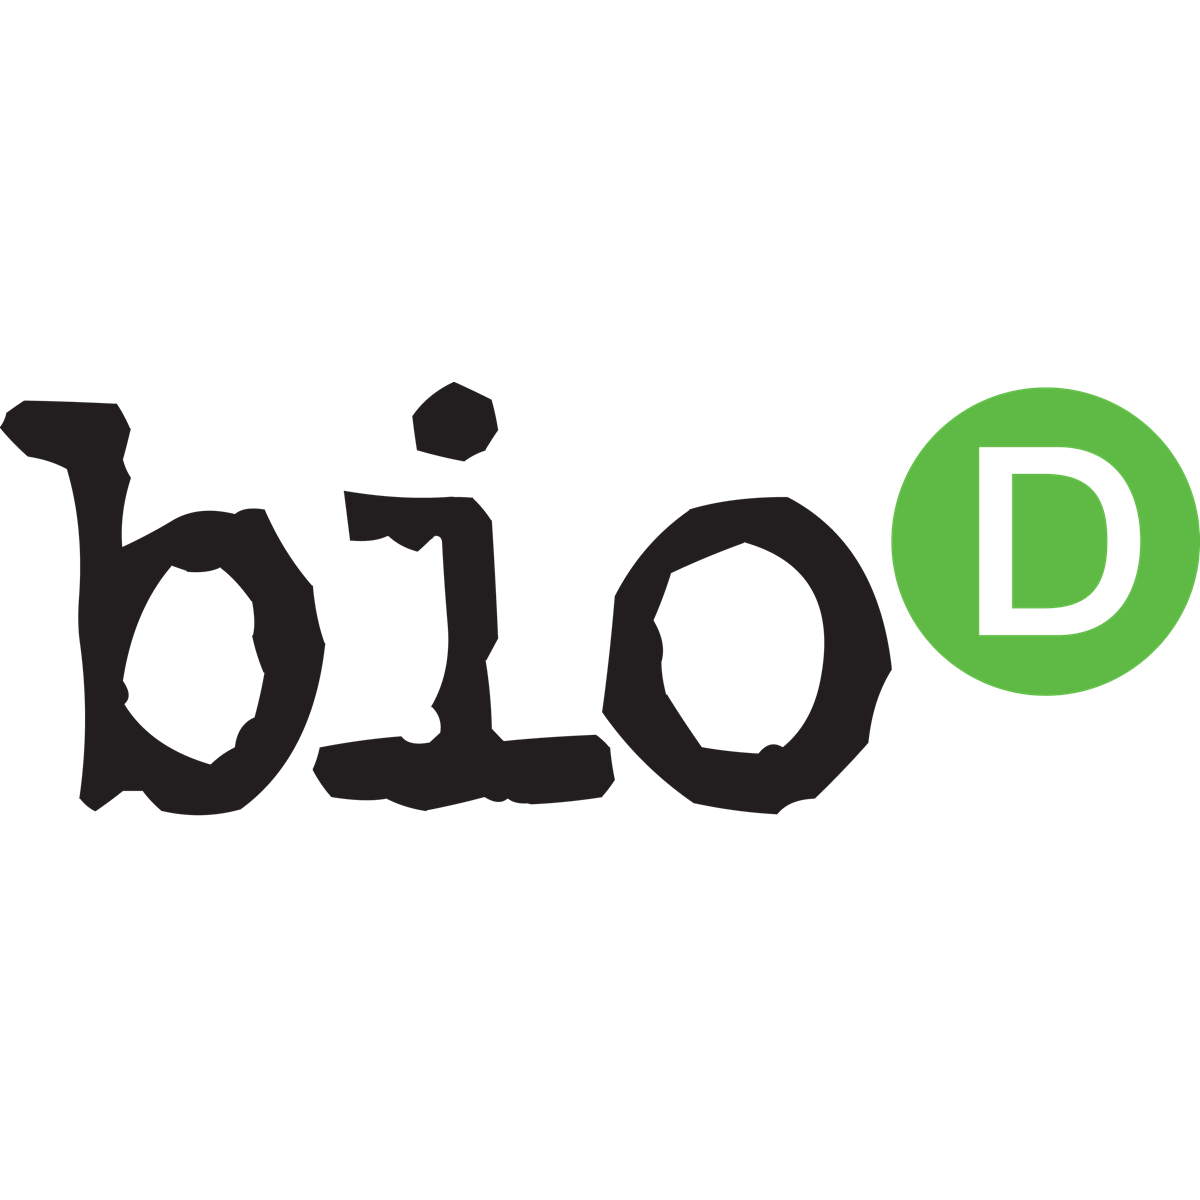 Where to Buy BioD Products